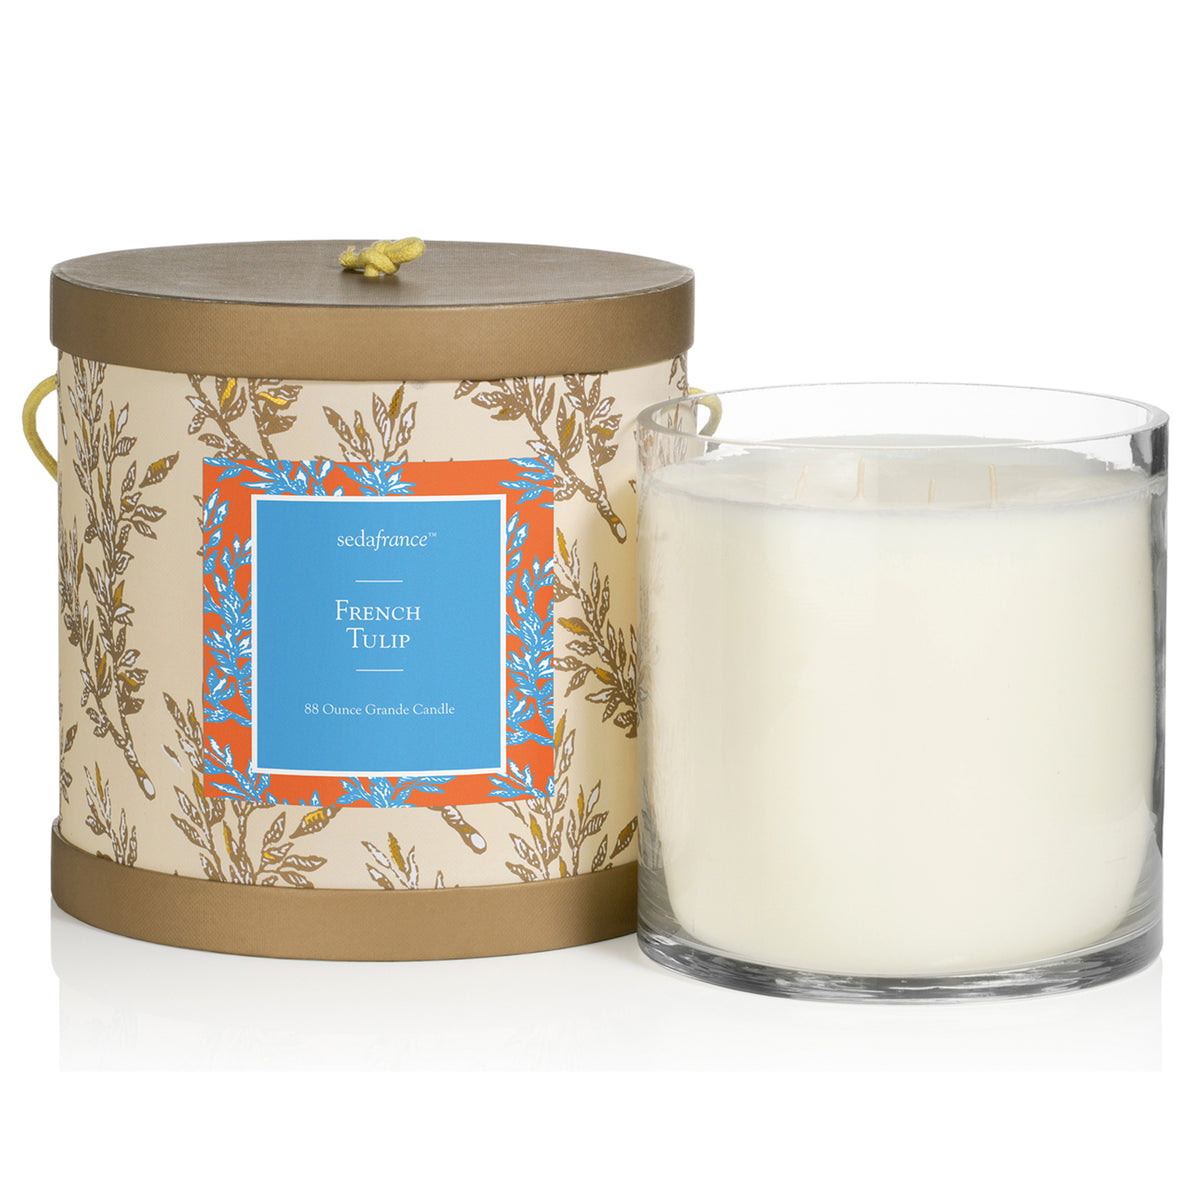 French Tulip Classic Toile 88 Ounce Candle